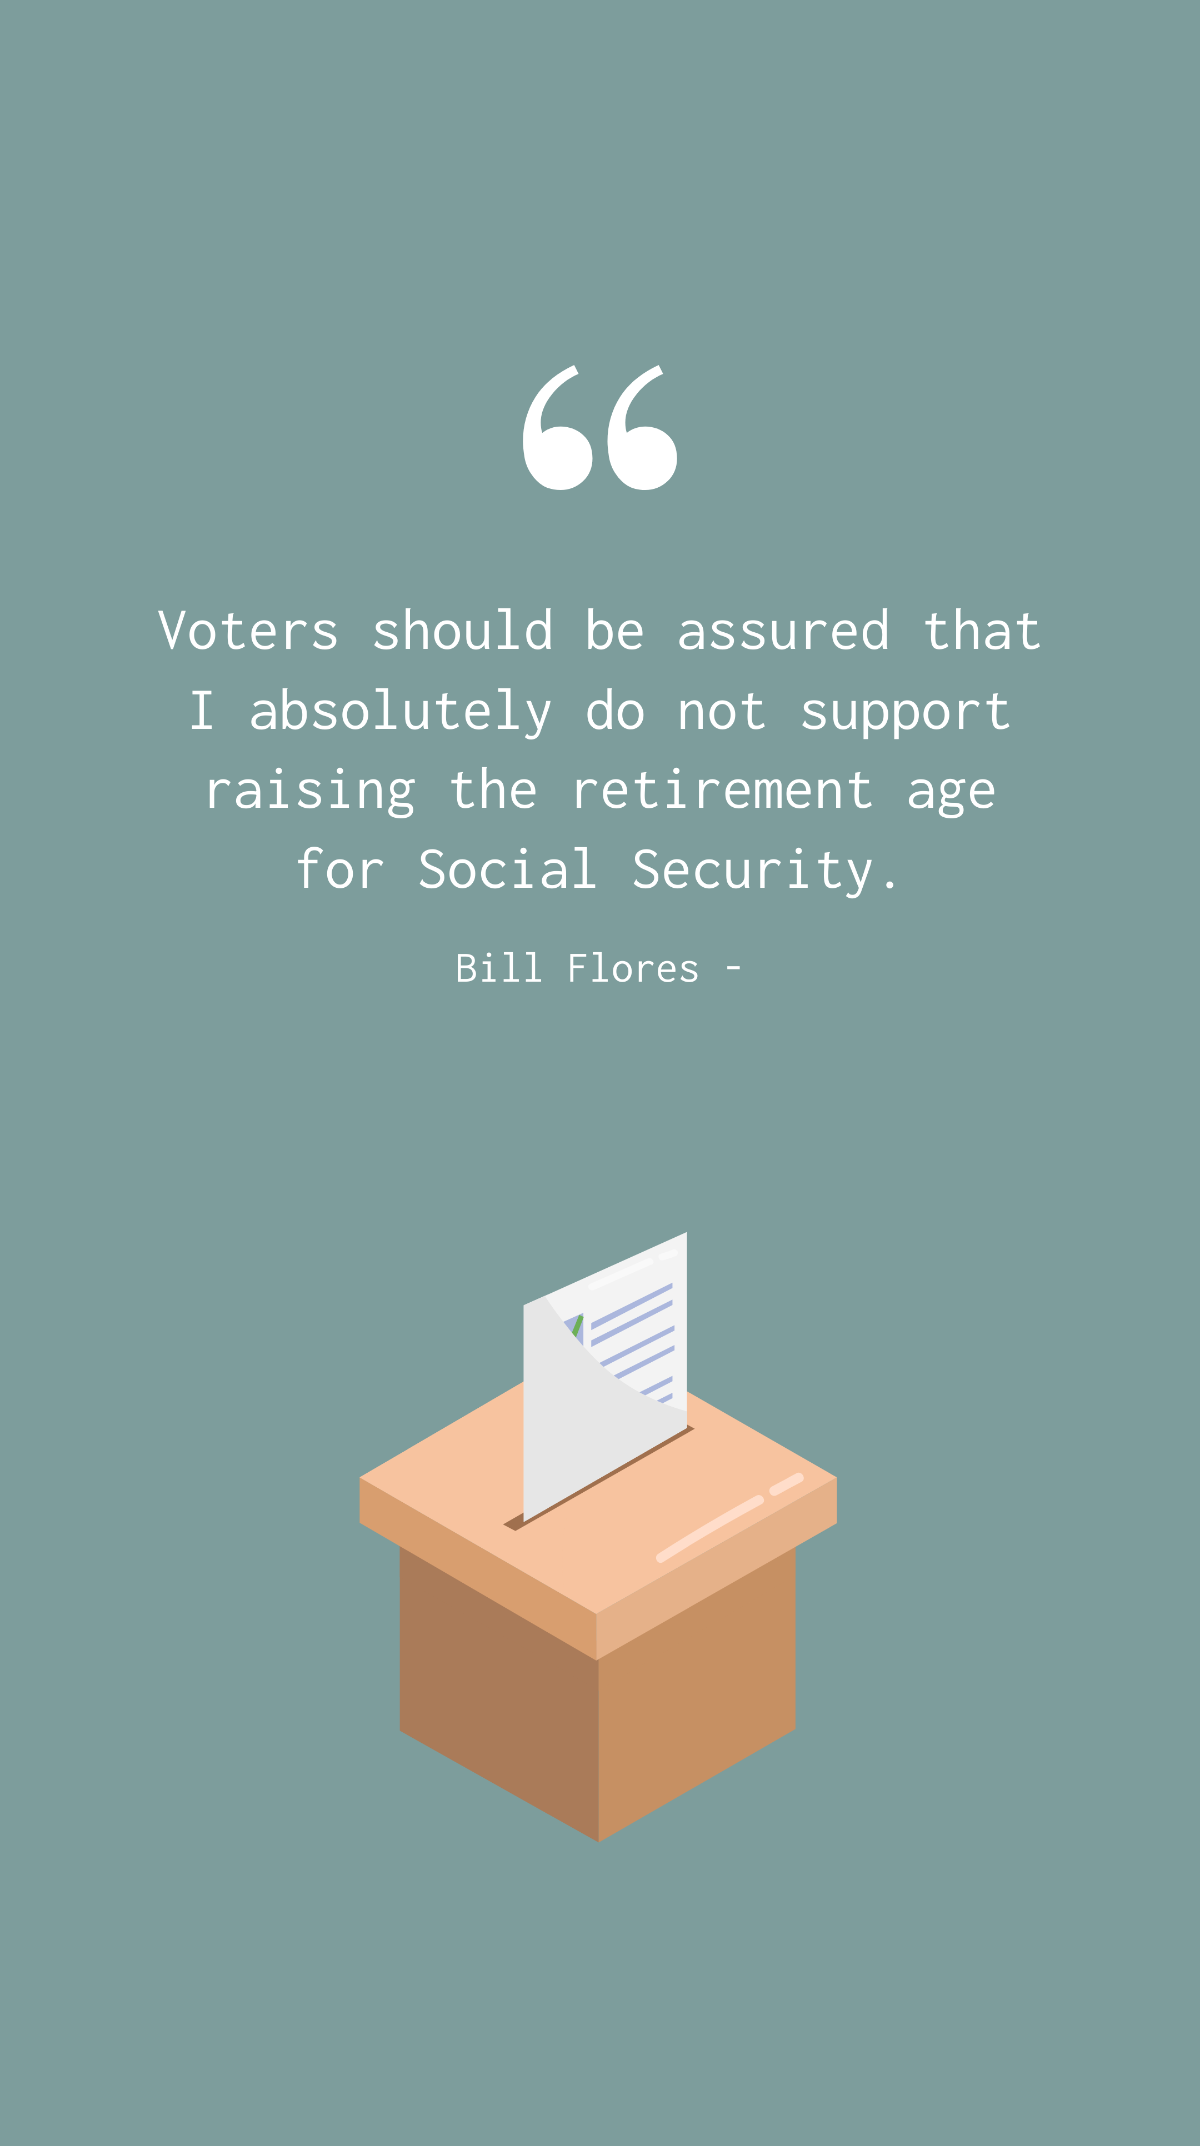 Bill Flores - Voters should be assured that I absolutely do not support raising the retirement age for Social Security.